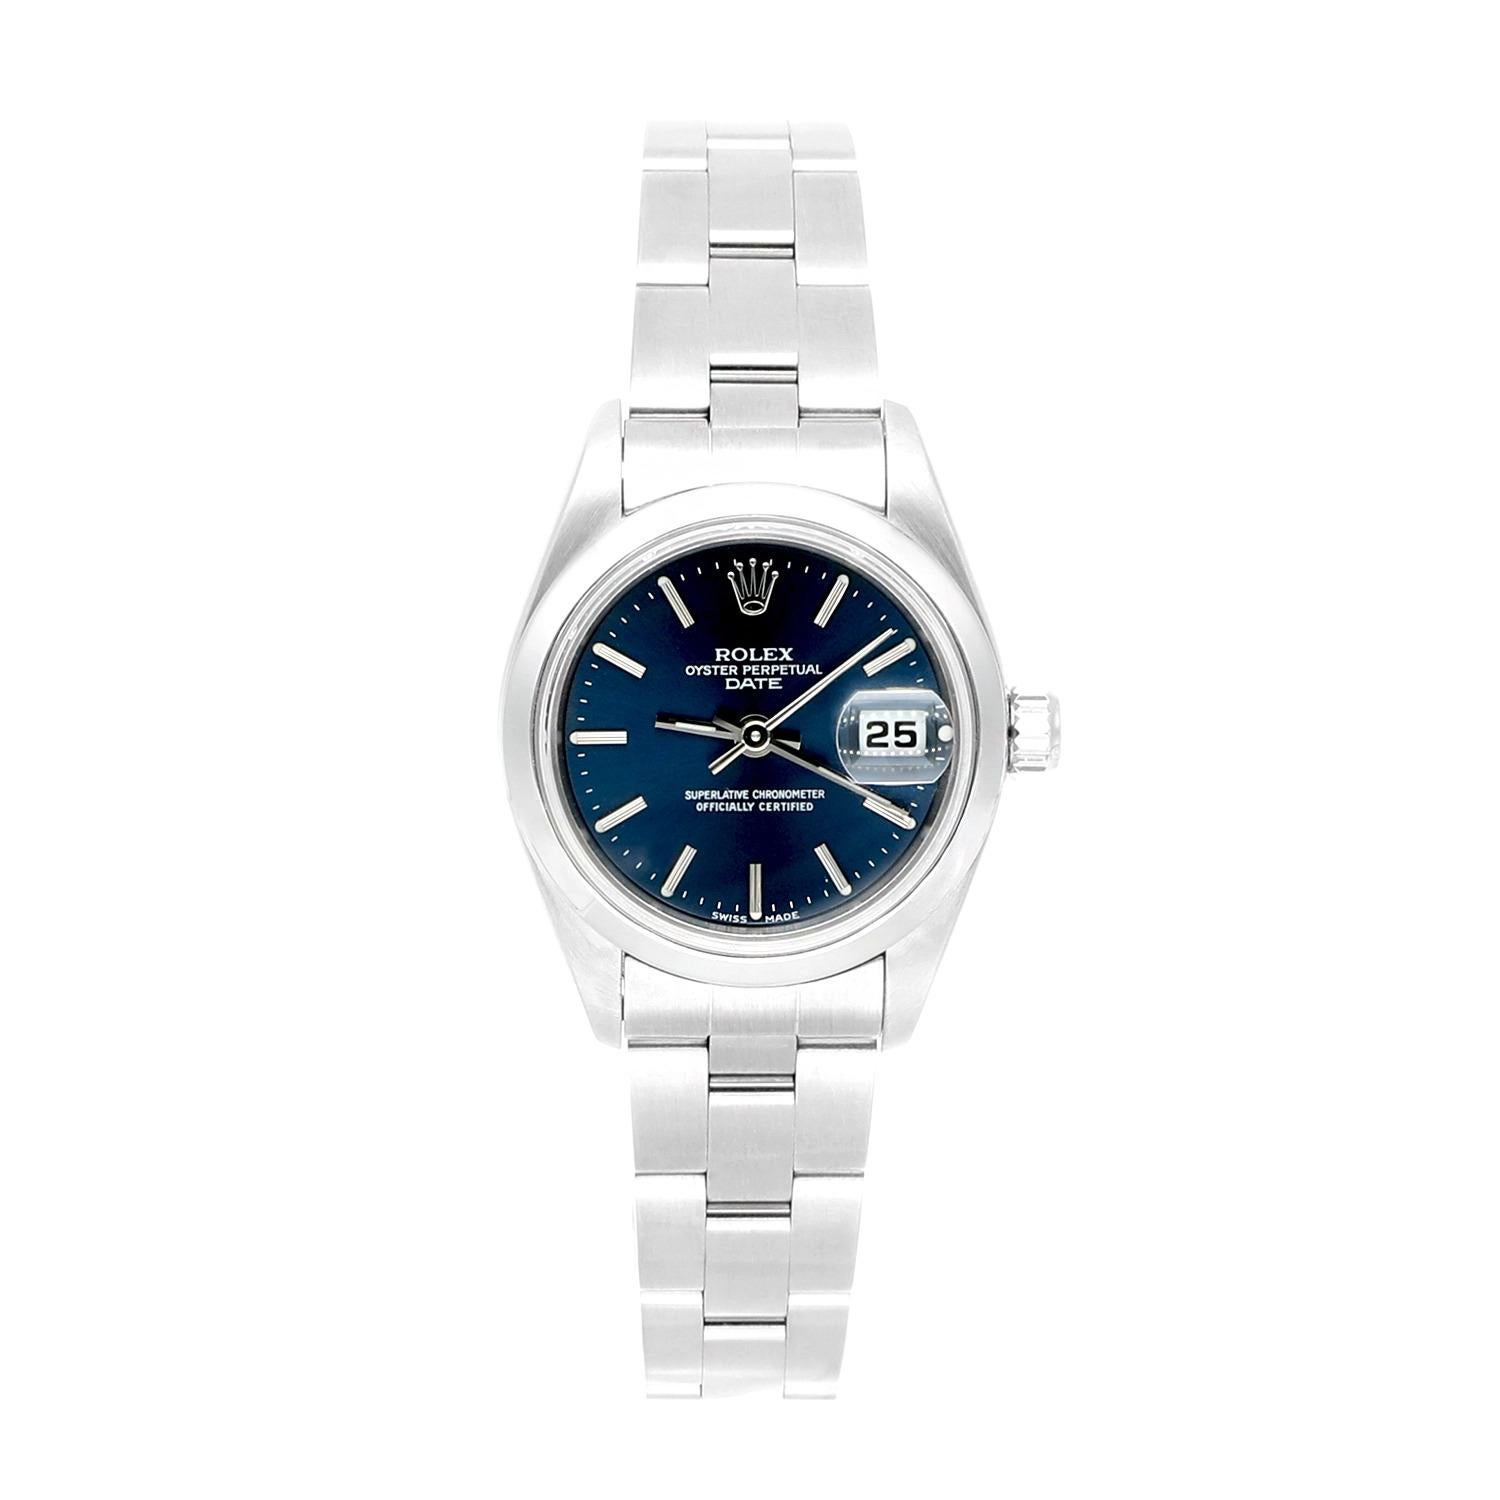 Rolex Date Blue Dial Oyster Bracelet Stainless Steel Ladies Watch 69160, Circa 1999.
This watch has been professionally polished, serviced and is in excellent overall condition. There are absolutely no visible scratches or blemishes. Authenticity